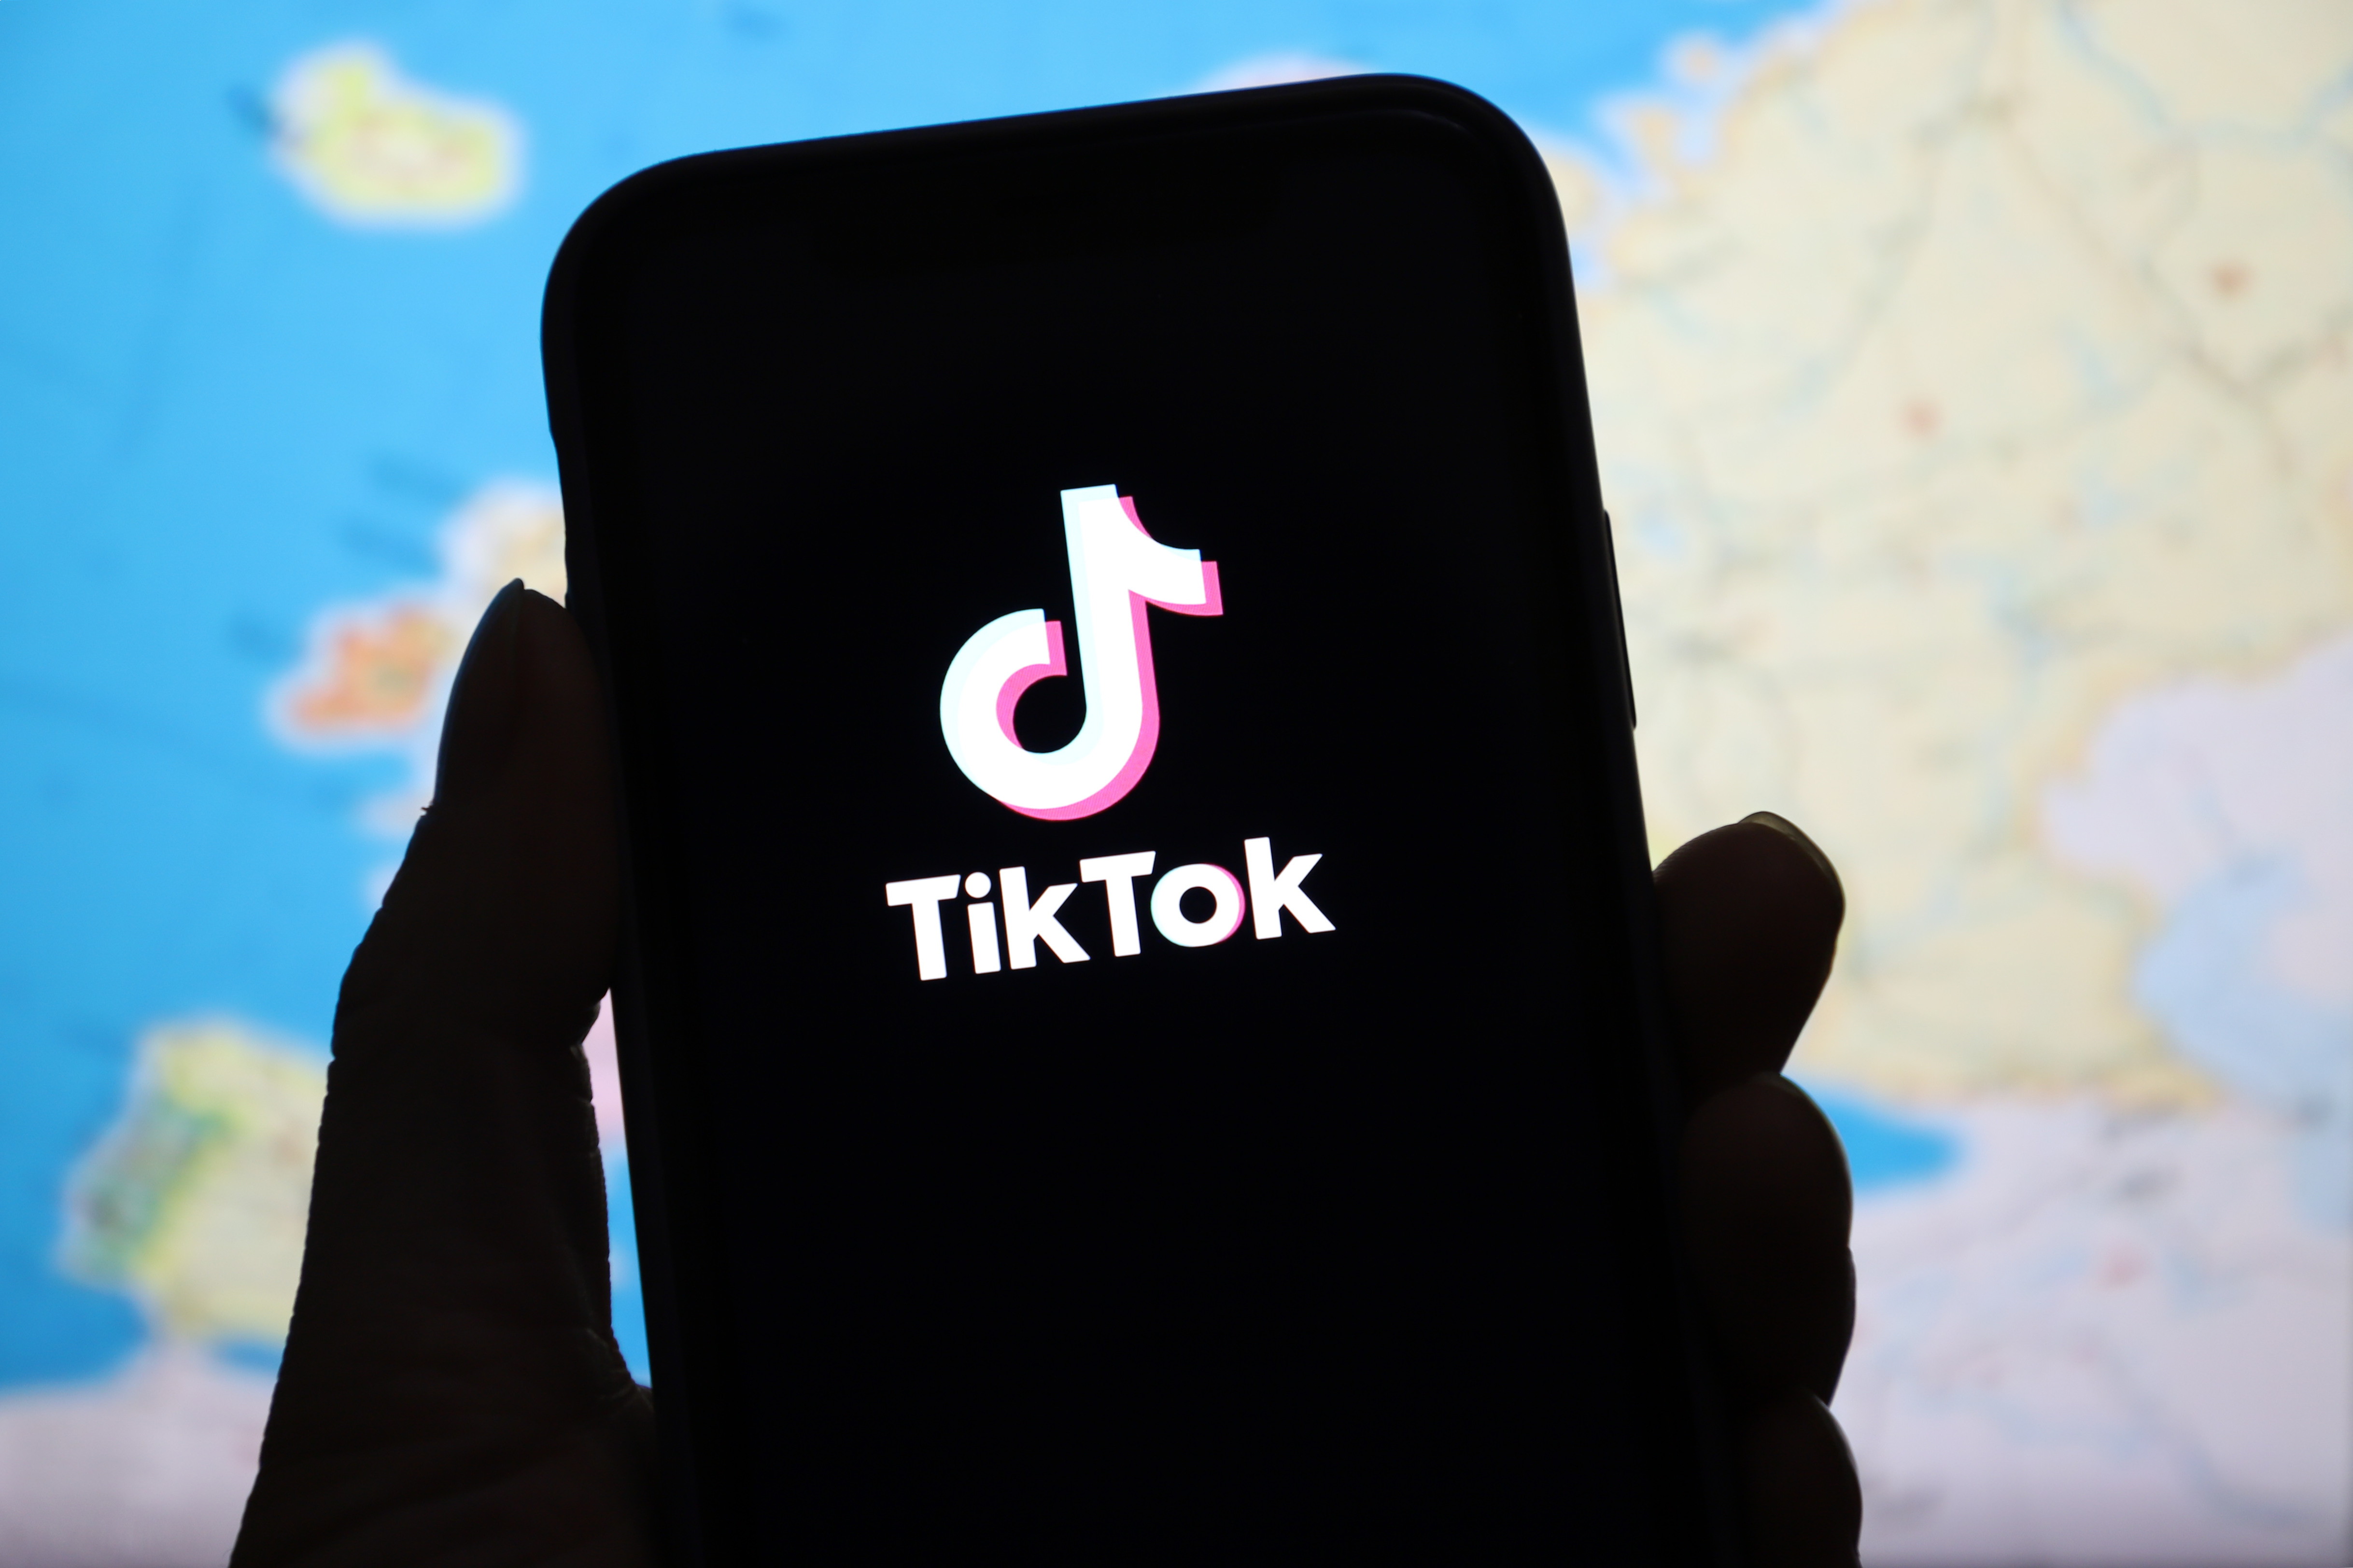 Bill that could ban TikTok in the U.S. gains momentum in Congress